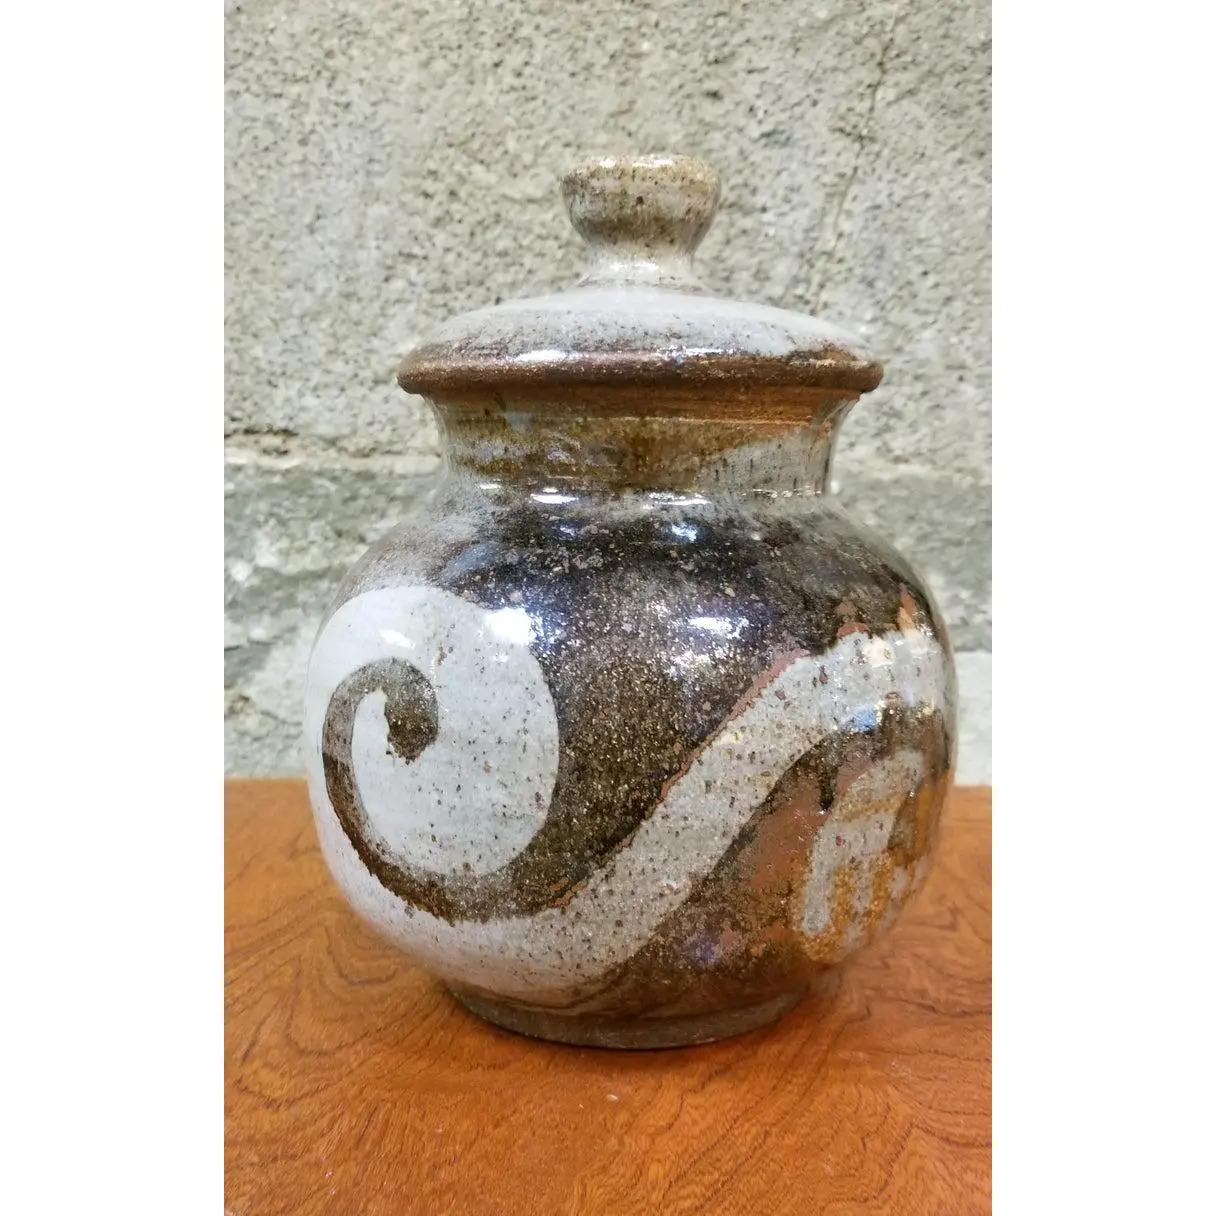 A Mid-Century Modern lidded pottery vase or jar by San Francisco artist Herman Roderick Volz, circa 1970s. Signed on base.
Painter, muralist, lithographer, set designer and ceramist. Formal training at the Art und Gewerbescule in Zurich and the